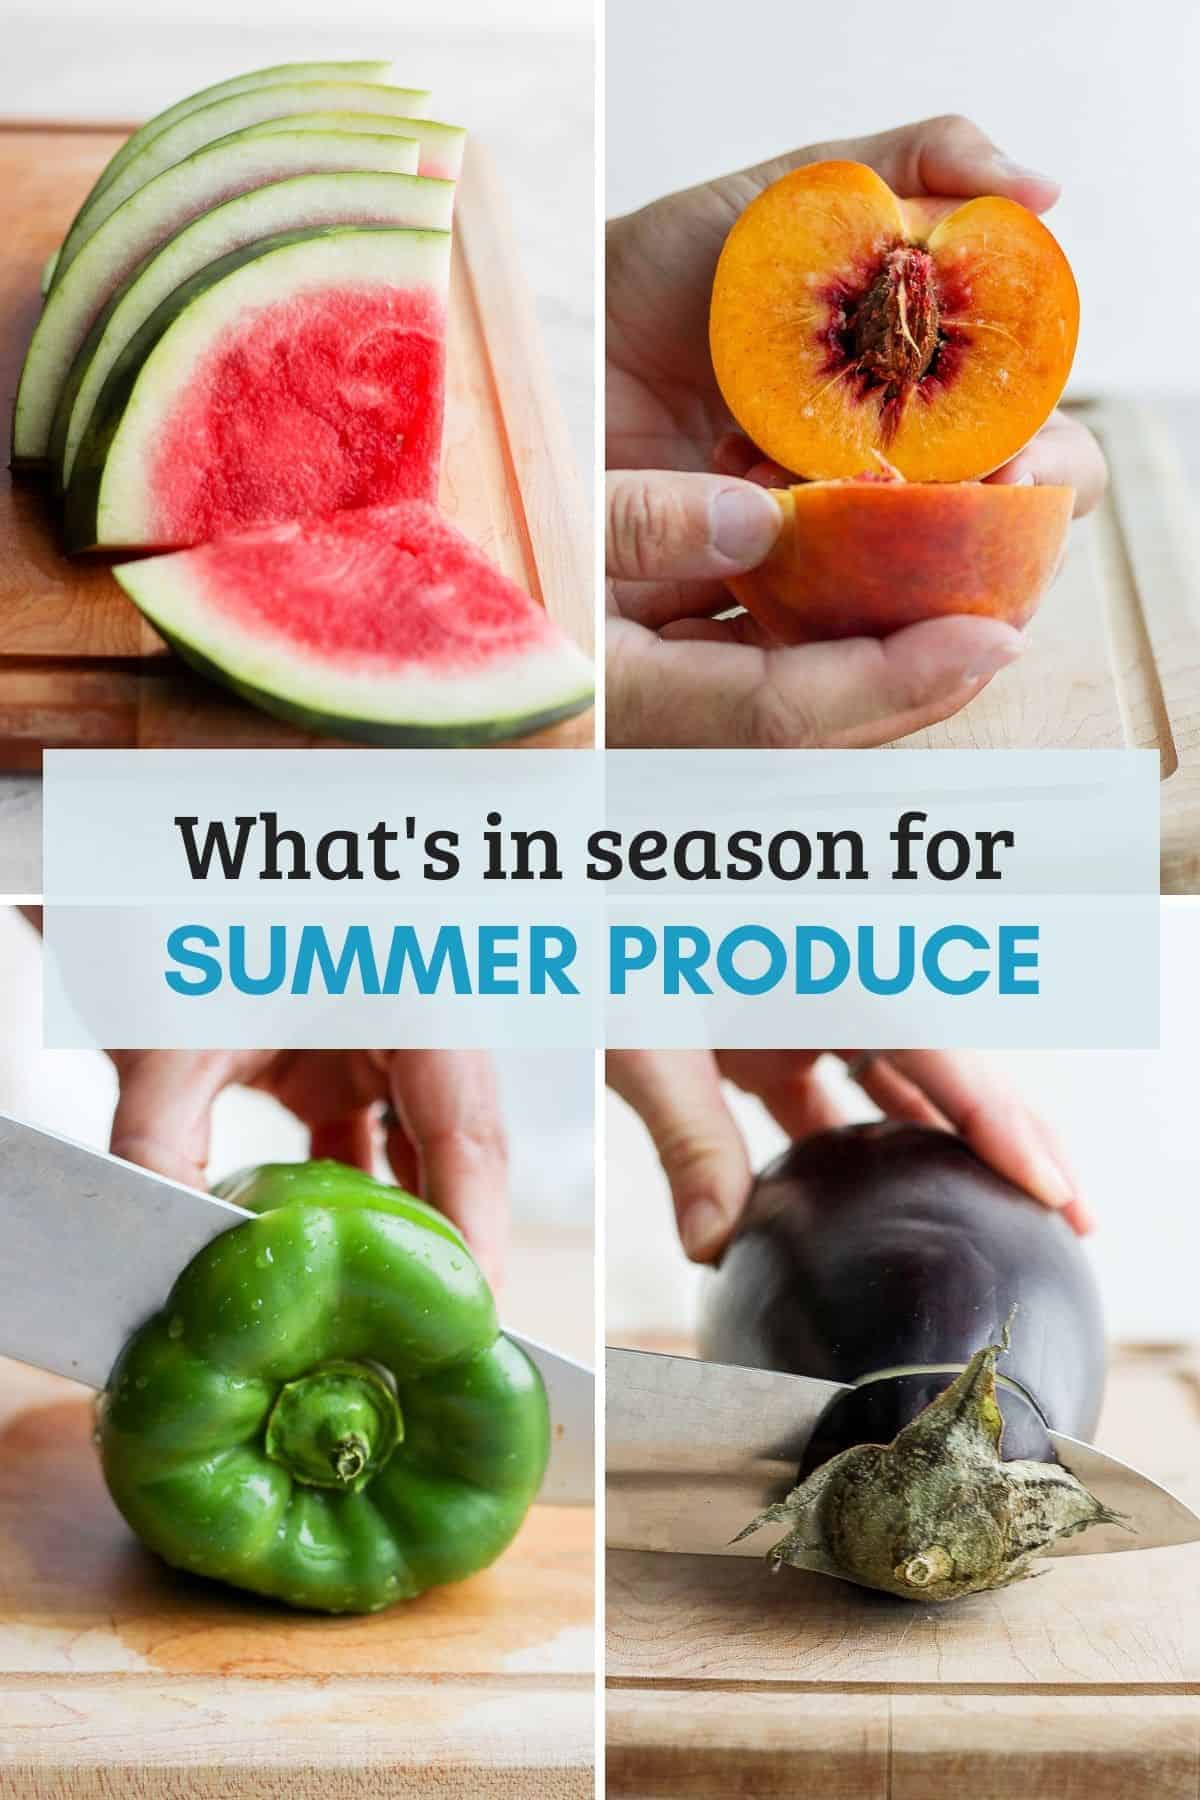 https://feelgoodfoodie.net/wp-content/uploads/2020/06/Ingredient-Guide-Summer-Produce.jpg